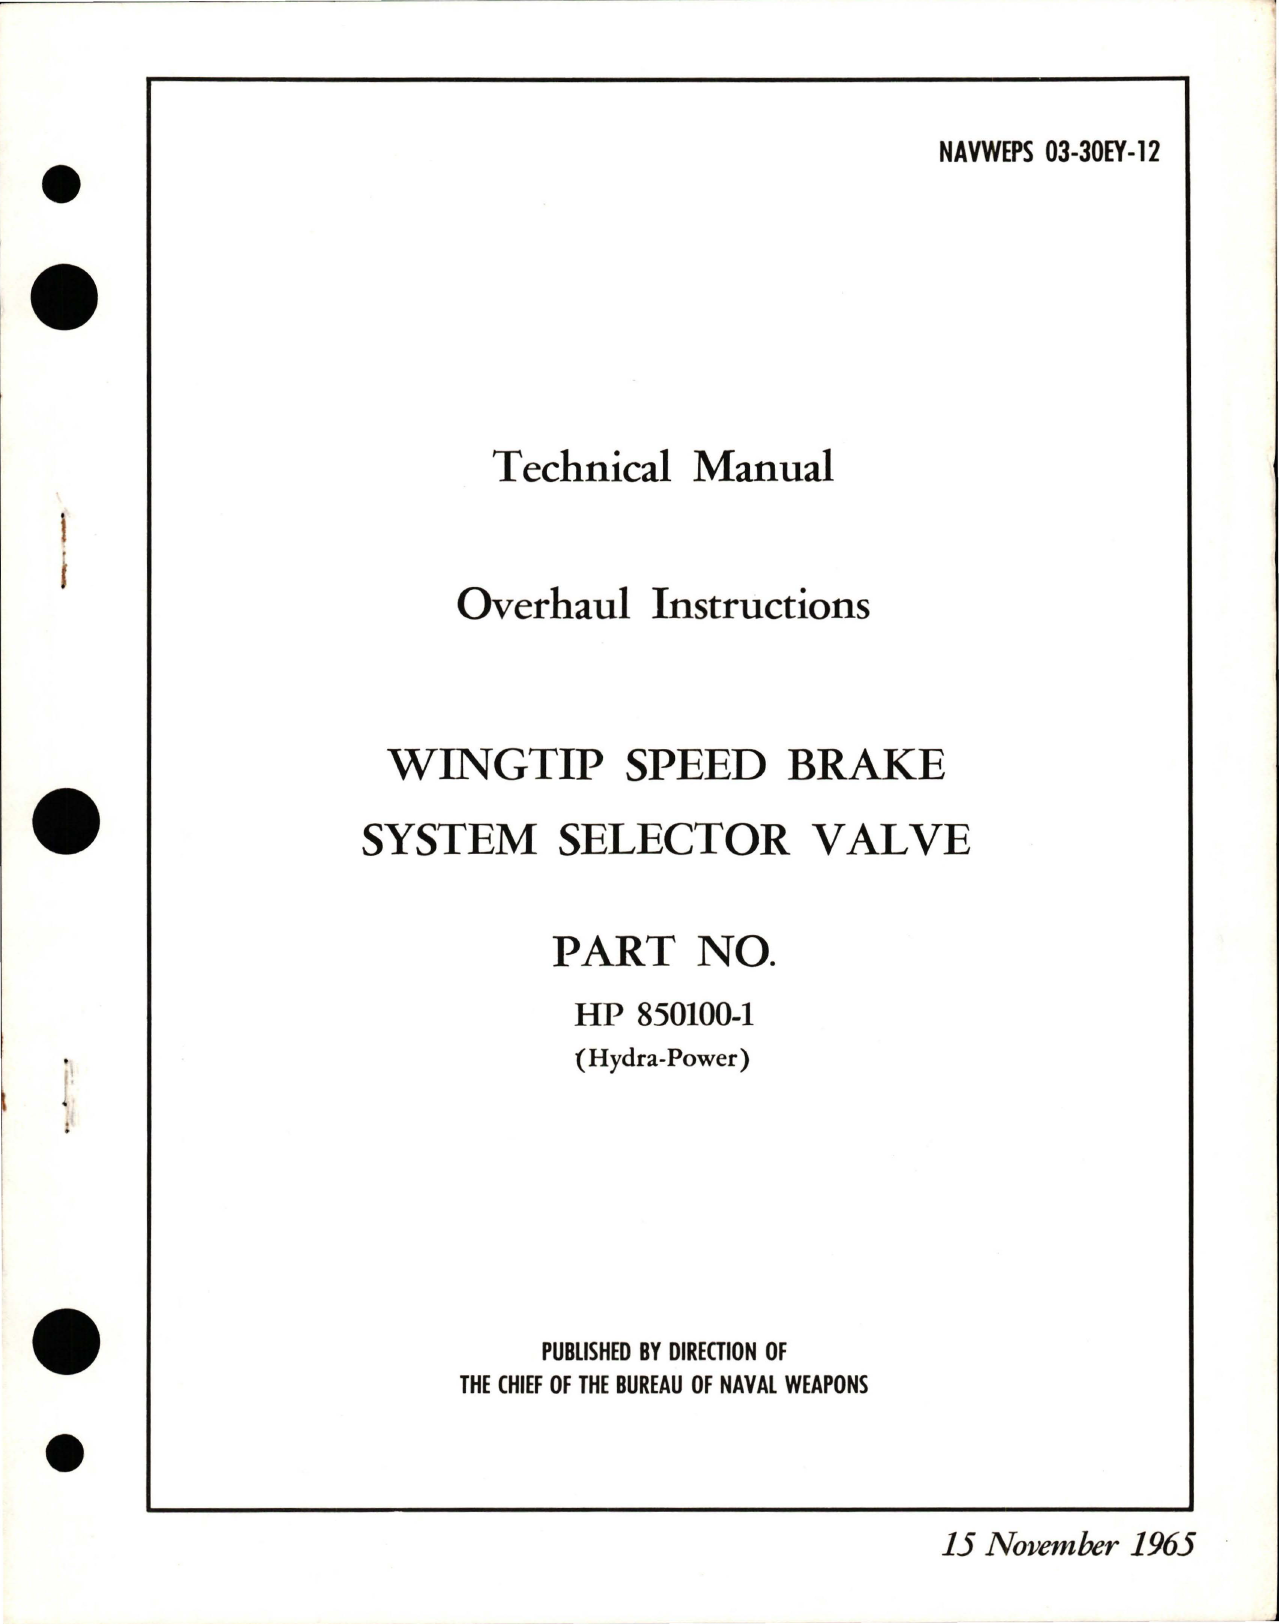 Sample page 1 from AirCorps Library document: Overhaul Instructions for Wingtip Speed Brake System Selector Valve - Part HP 850100-1